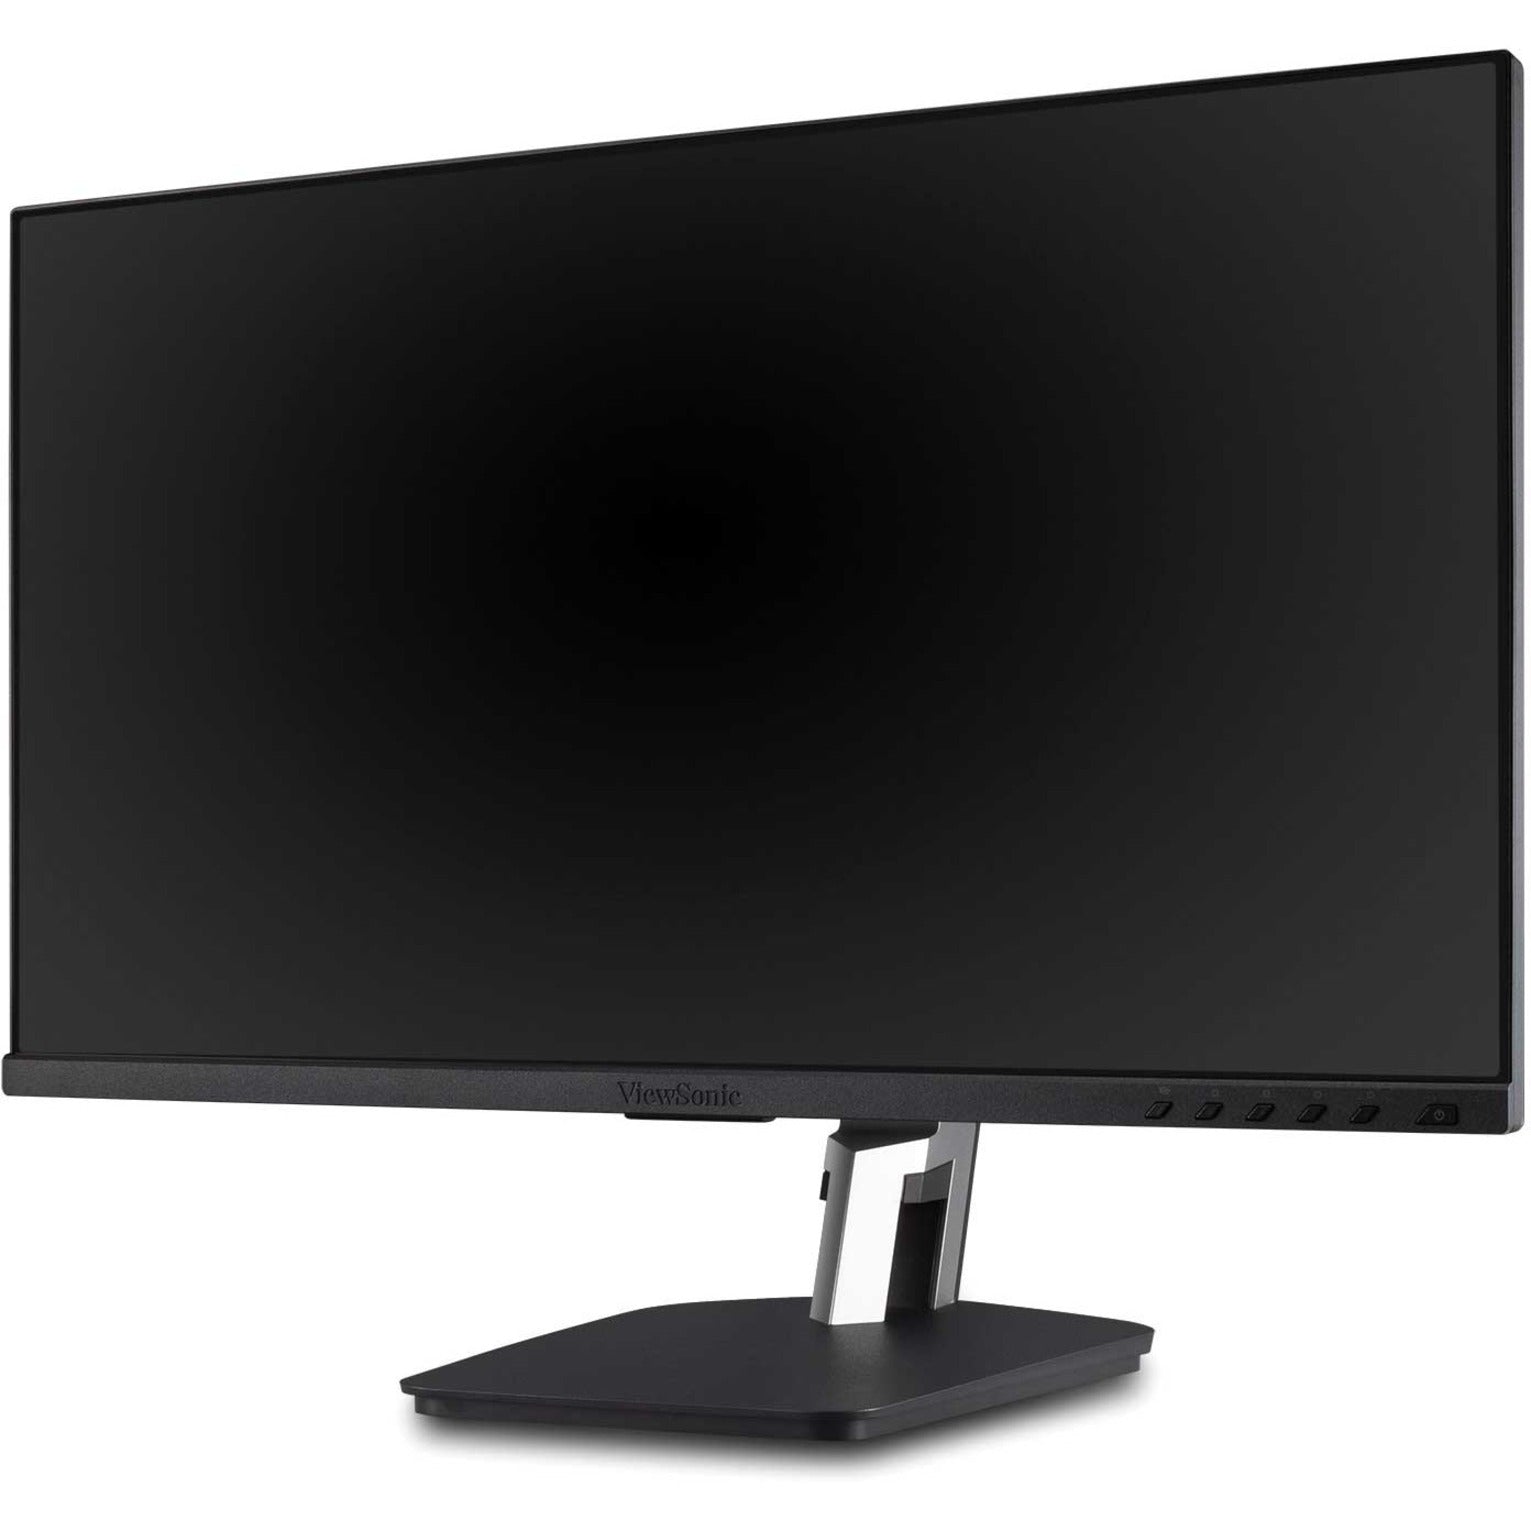 ViewSonic ViewBoard Touch Display ID2455, 23.8" 16:9 LCD Touch Monitor, 1920 x 1080 Resolution